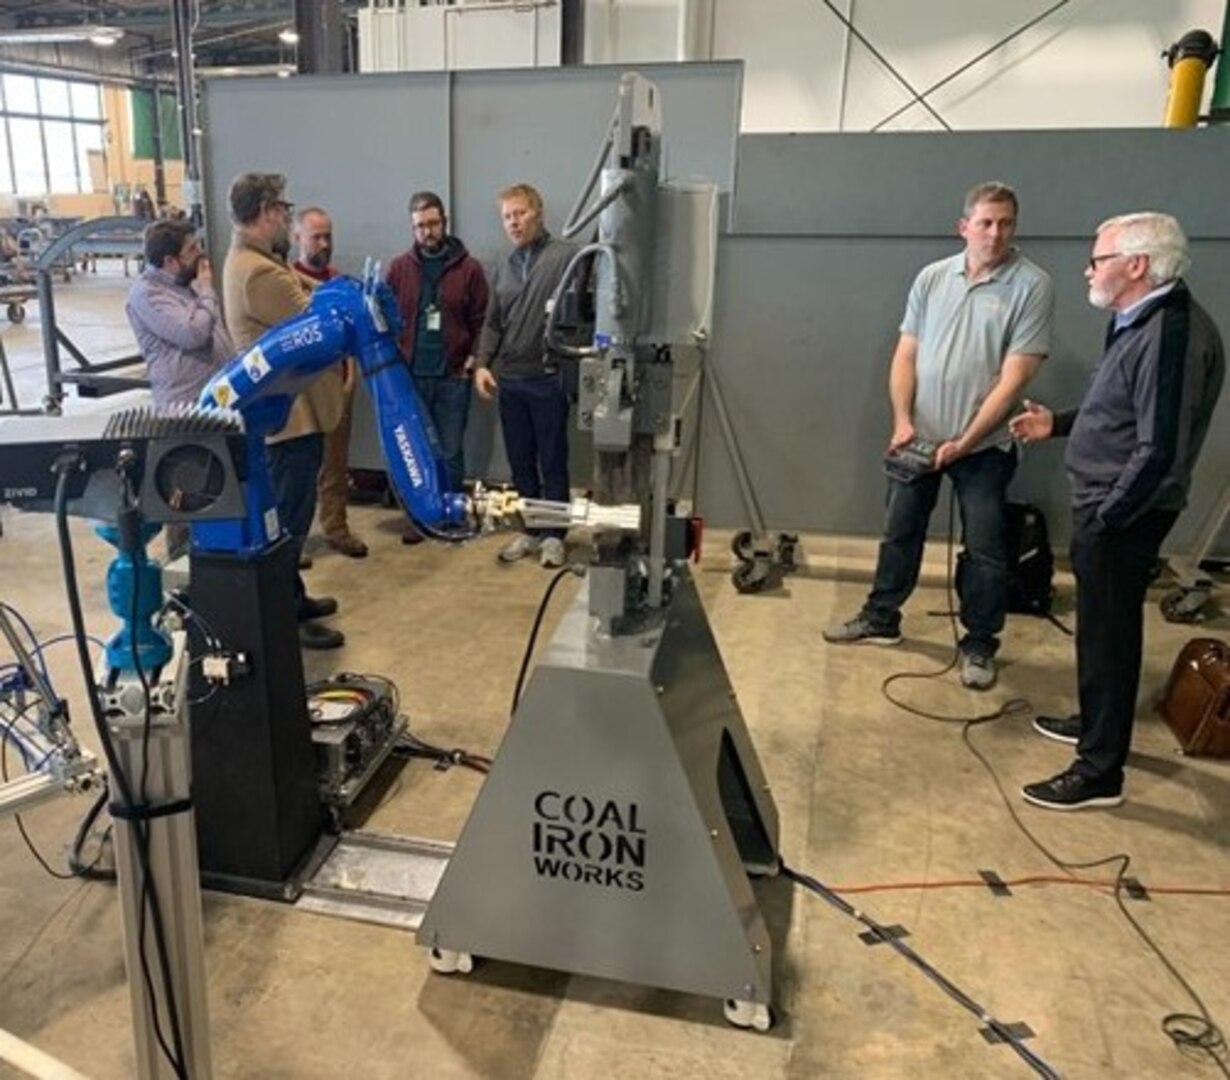 A multidisciplinary development team, comprised of Air Force Research Laboratory, or AFRL, depot, industry and academia representatives, observes the successful first demonstration of an autonomous robotic incremental metal forming prototype, nicknamed AI-FORGE, at Warner-Robins Air Logistics Complex, Georgia, in late January 2023. Personnel from AFRL’s Materials and Manufacturing Directorate, Ohio State University, the Advanced Robotics for Manufacturing Institute, Yaskawa Motoman, and CapSen Robotics collaborated to develop the robotic blacksmithing system, which uses incremental forming, a heat-assisted metalworking process that permits users to manufacture small lots of customized manufactured parts for military aircraft. During its initial test run, the artificially intelligent system operated autonomously without human interruption for over six hours.